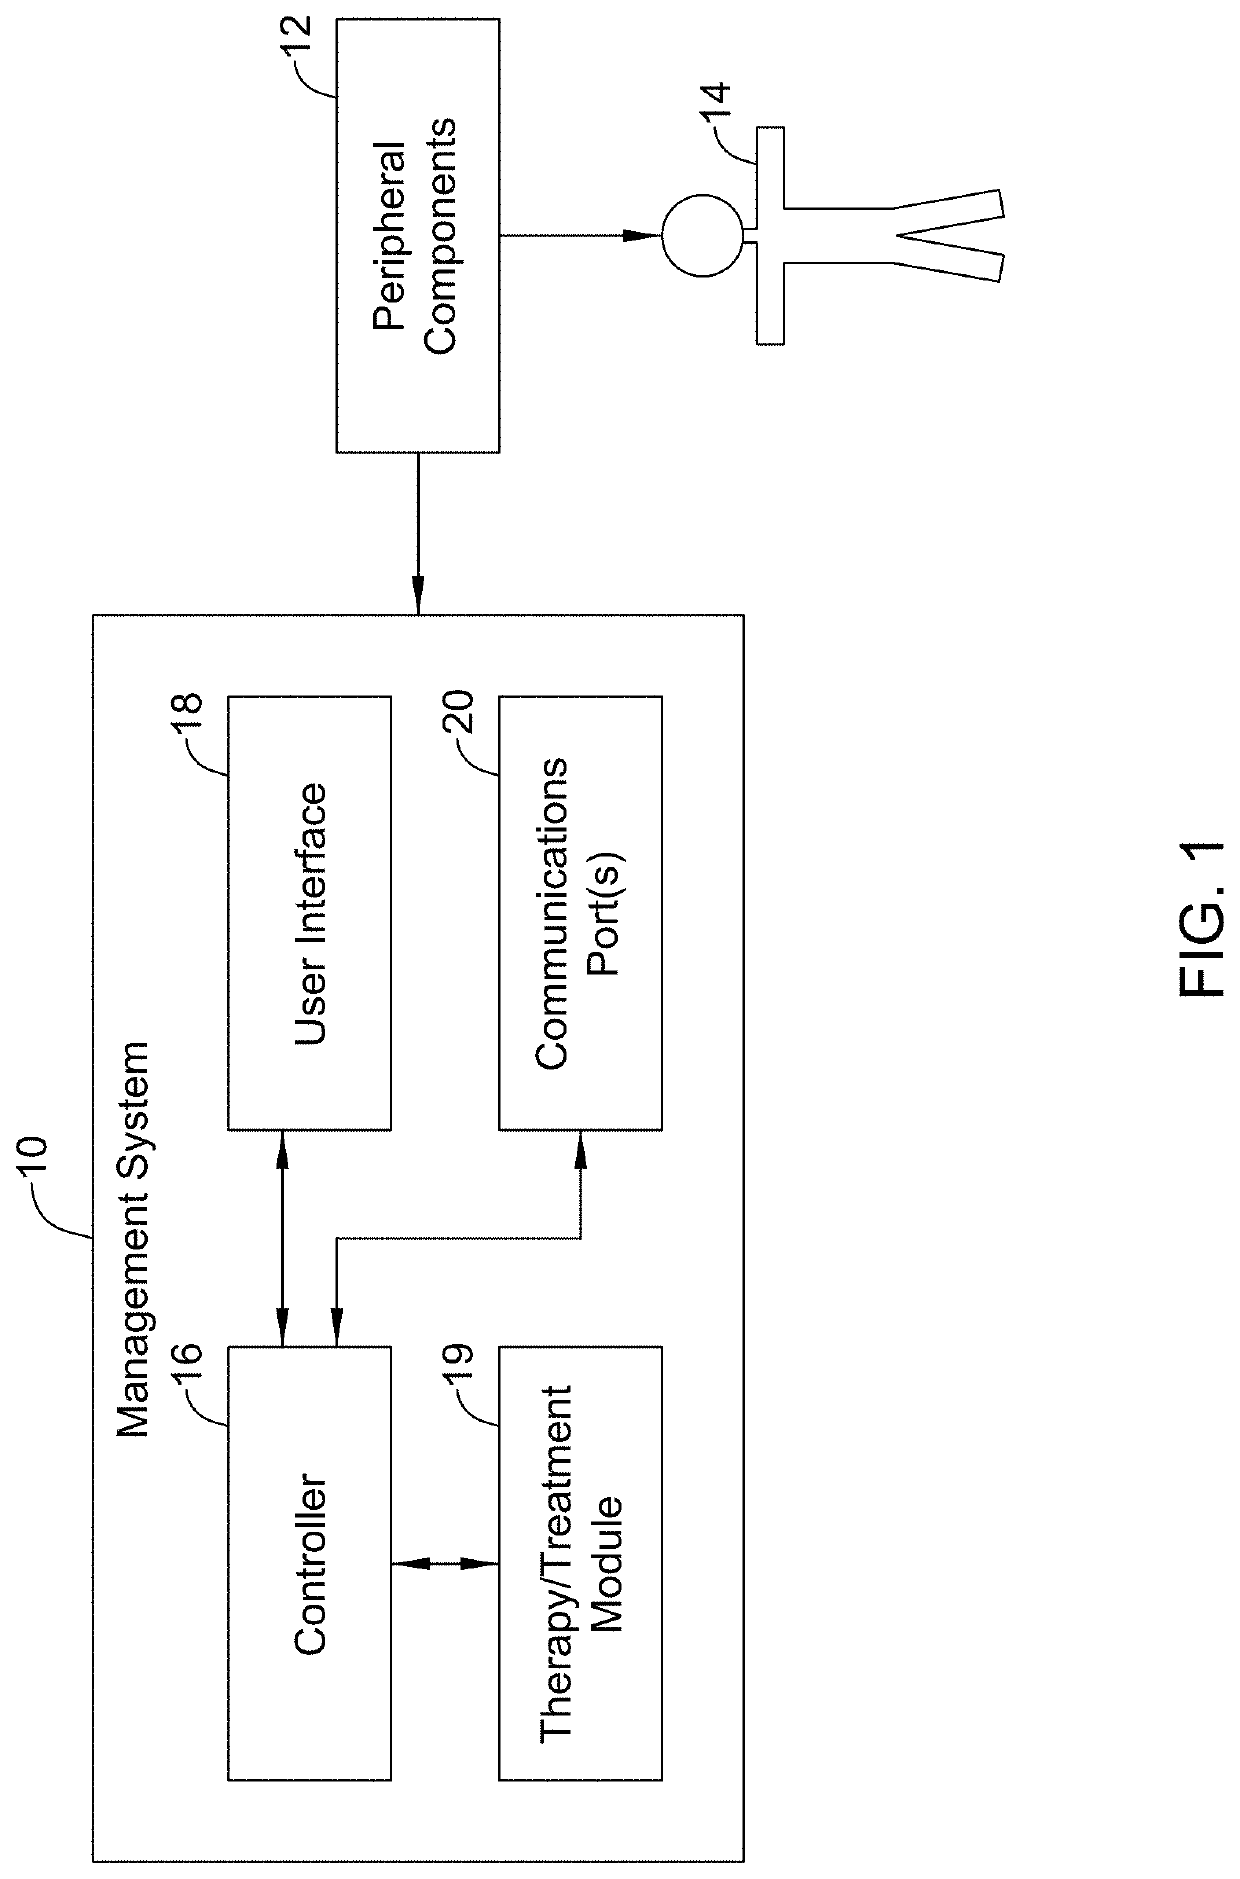 Systems and methods for managing, monitoring, and treating patient conditions